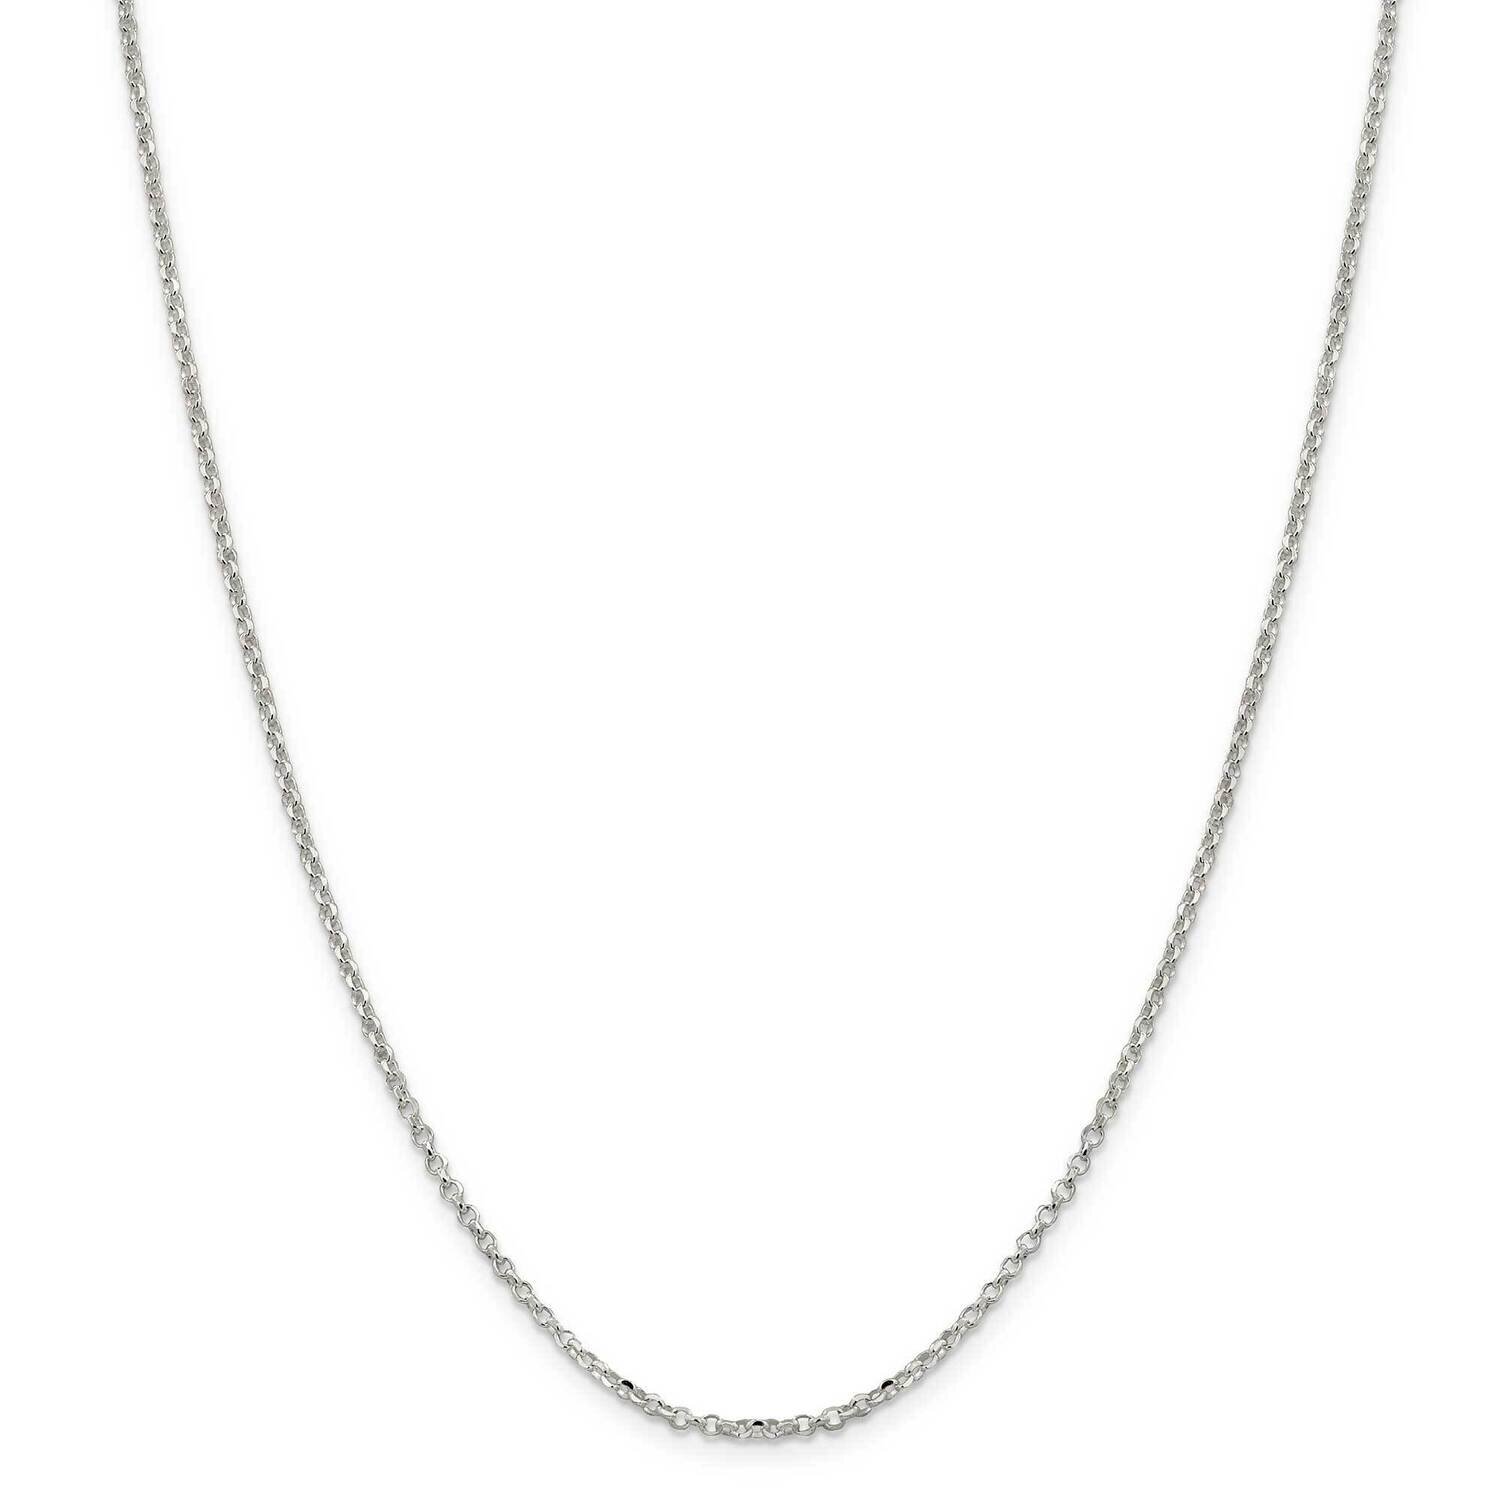 2mm Diamond-Cut Cable Chain with 2 Inch Extender 18 Inch Sterling Silver QHC035E-18